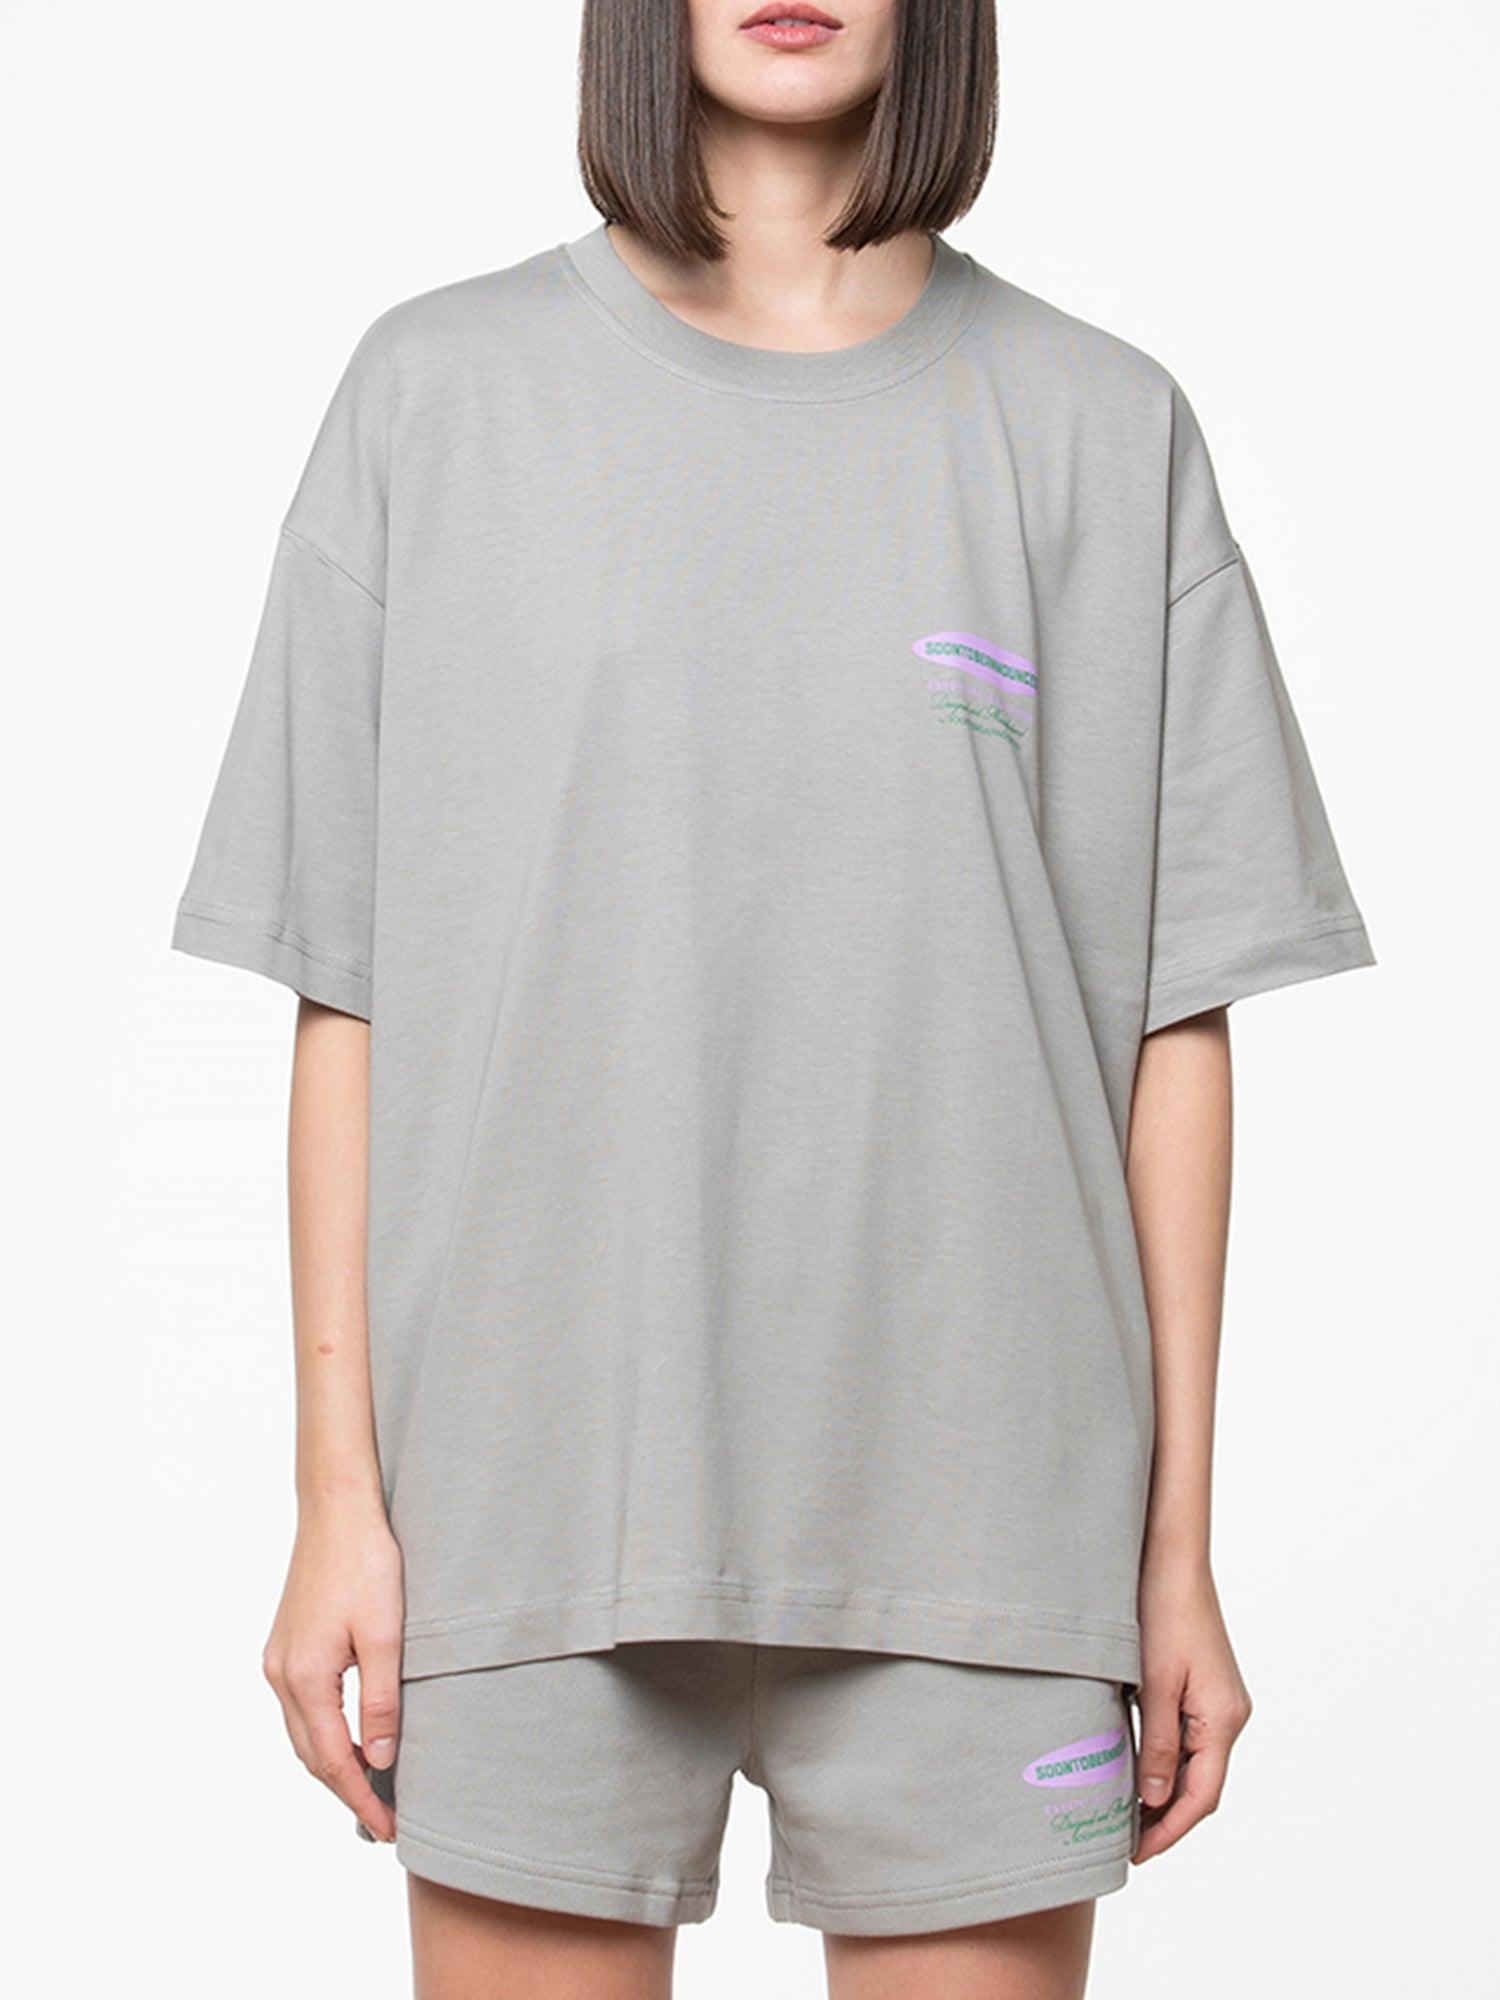 Essentials Logo Oversize S/S T-Shirt - SOON TO BE ANNOUNCED